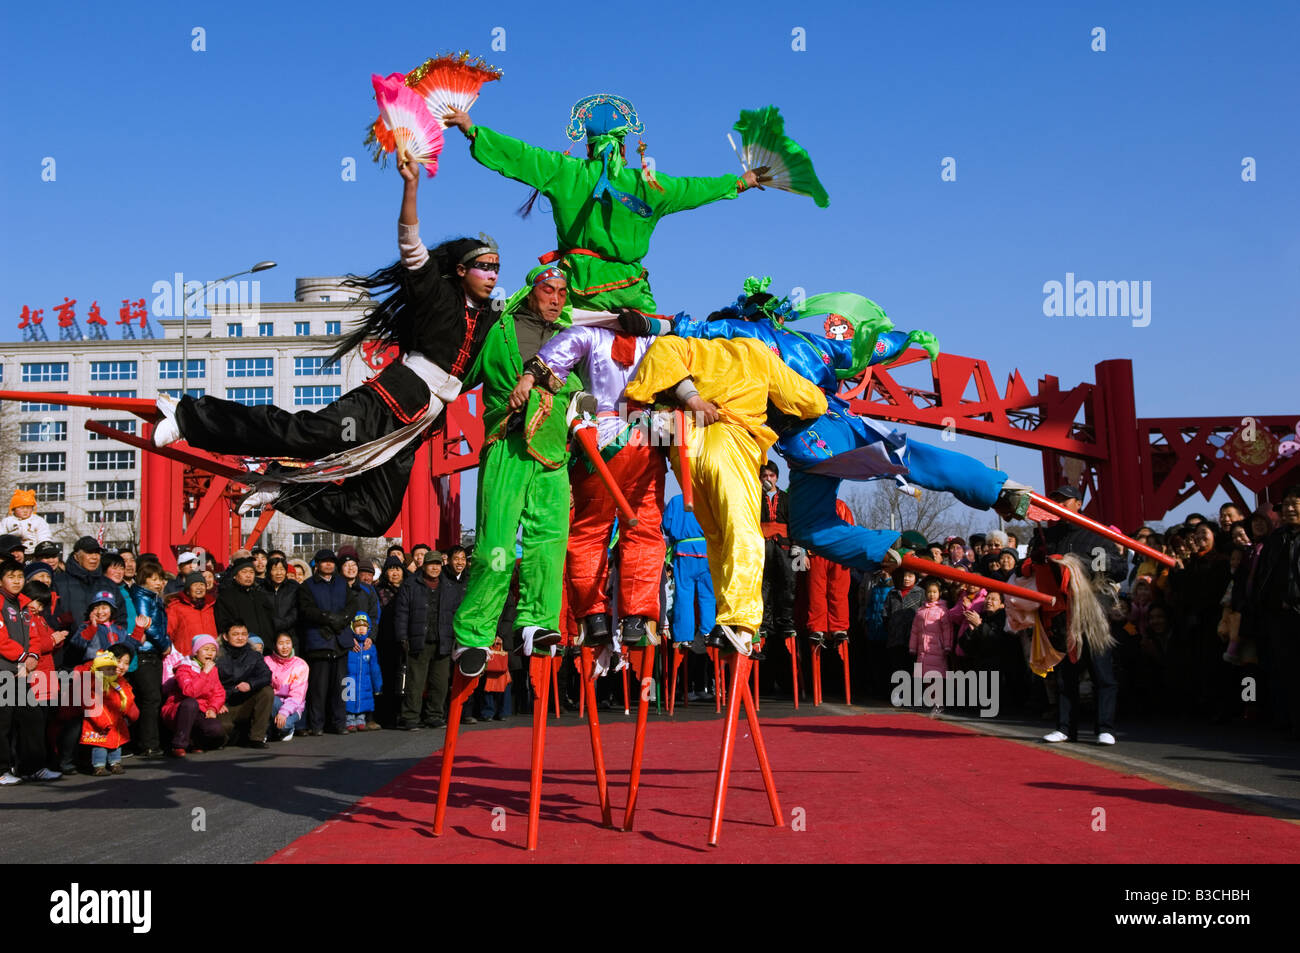 Stilt Dance High Resolution Stock Photography and Images - Alamy